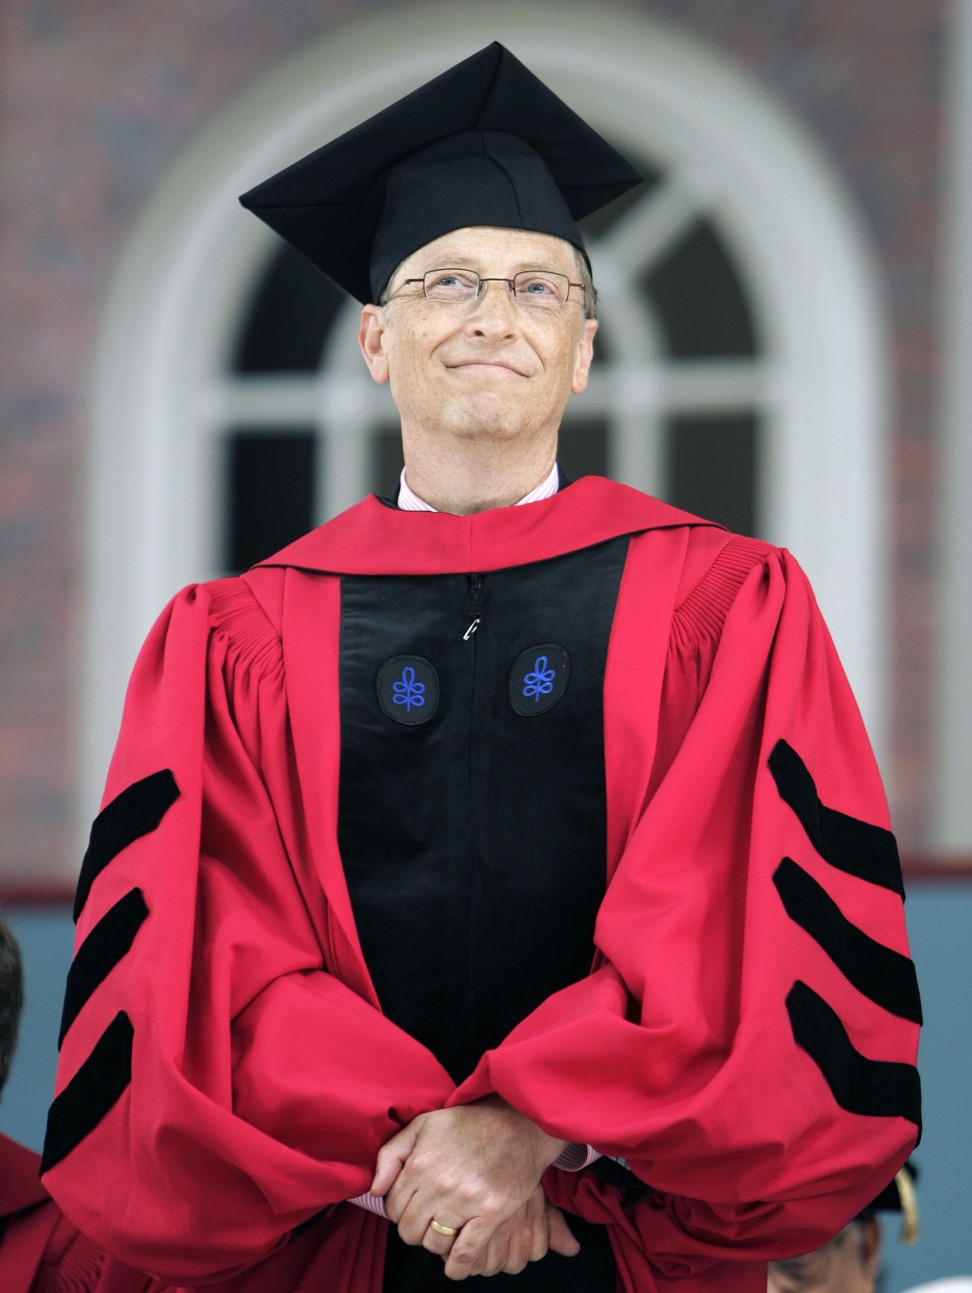 Bill Gates, who dropped out of Harvard and co-founded Microsoft, returns to the university in 2007 to collect an honorary law degree. Photo: Reuters